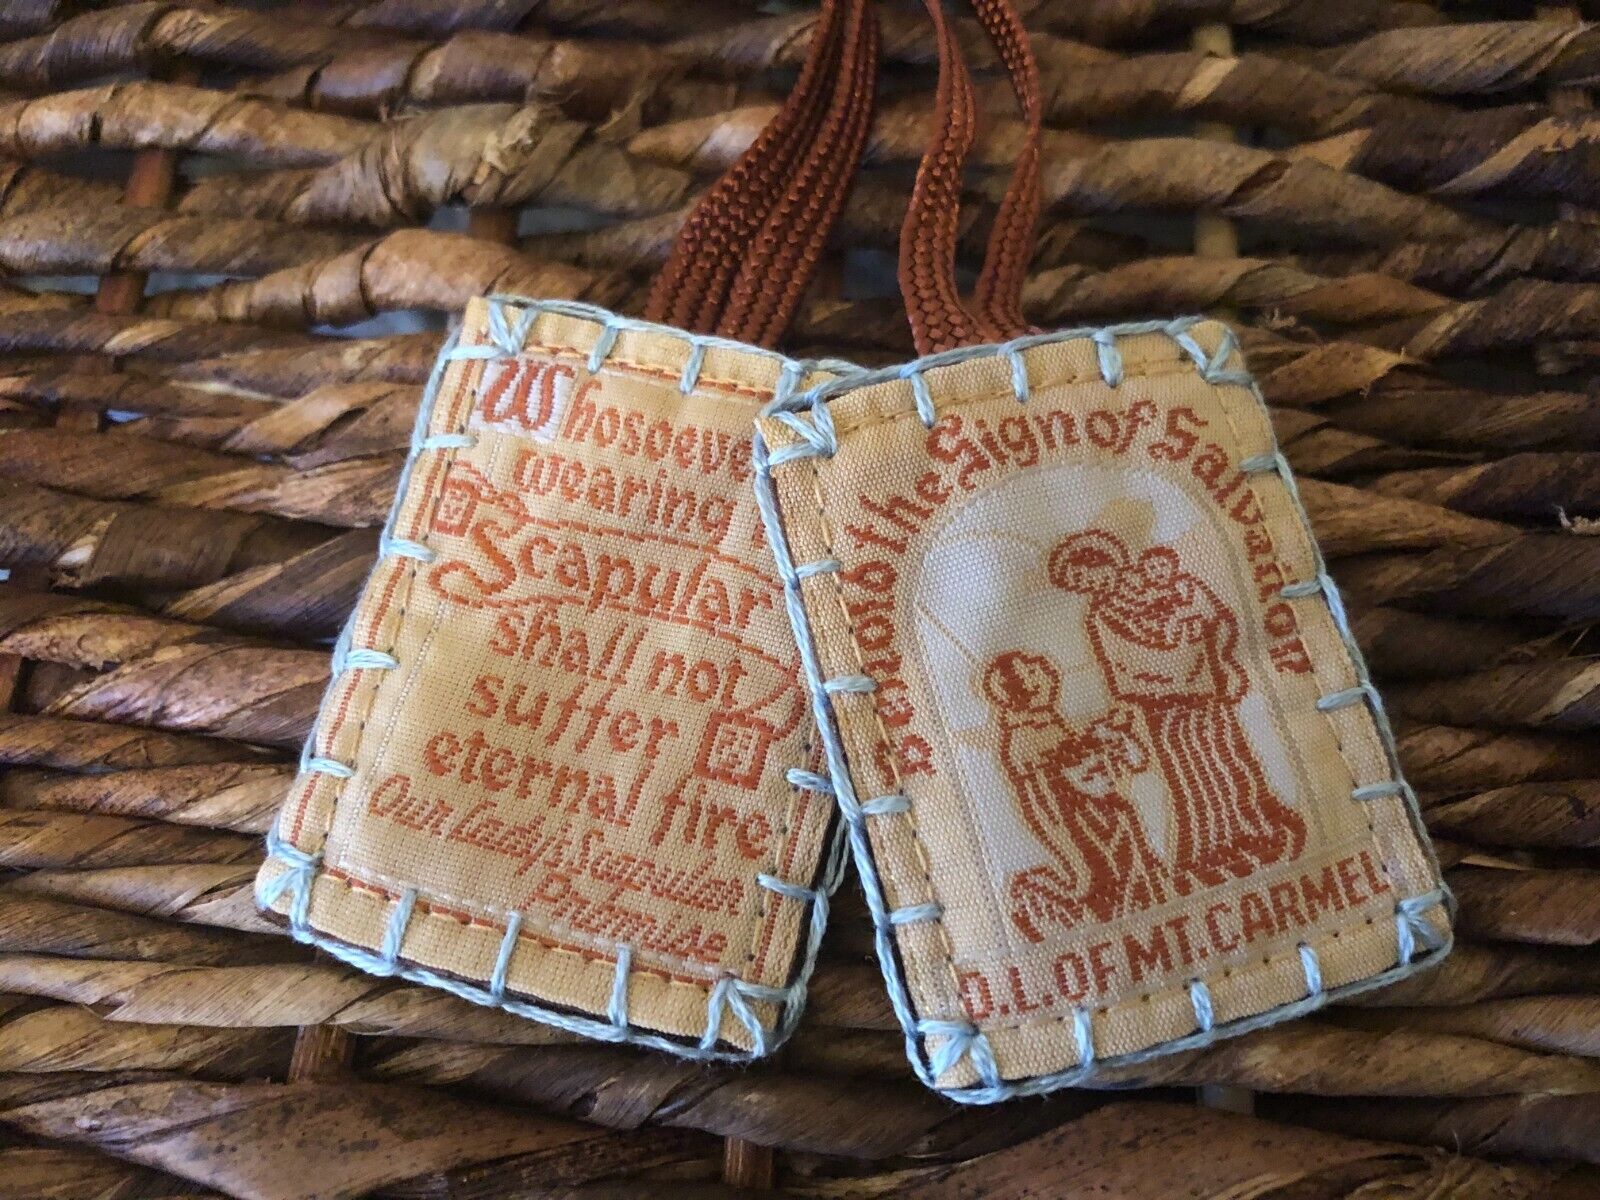 Carmelite Brown Scapular - Hand Embroidered in Light Blue - 100% wool